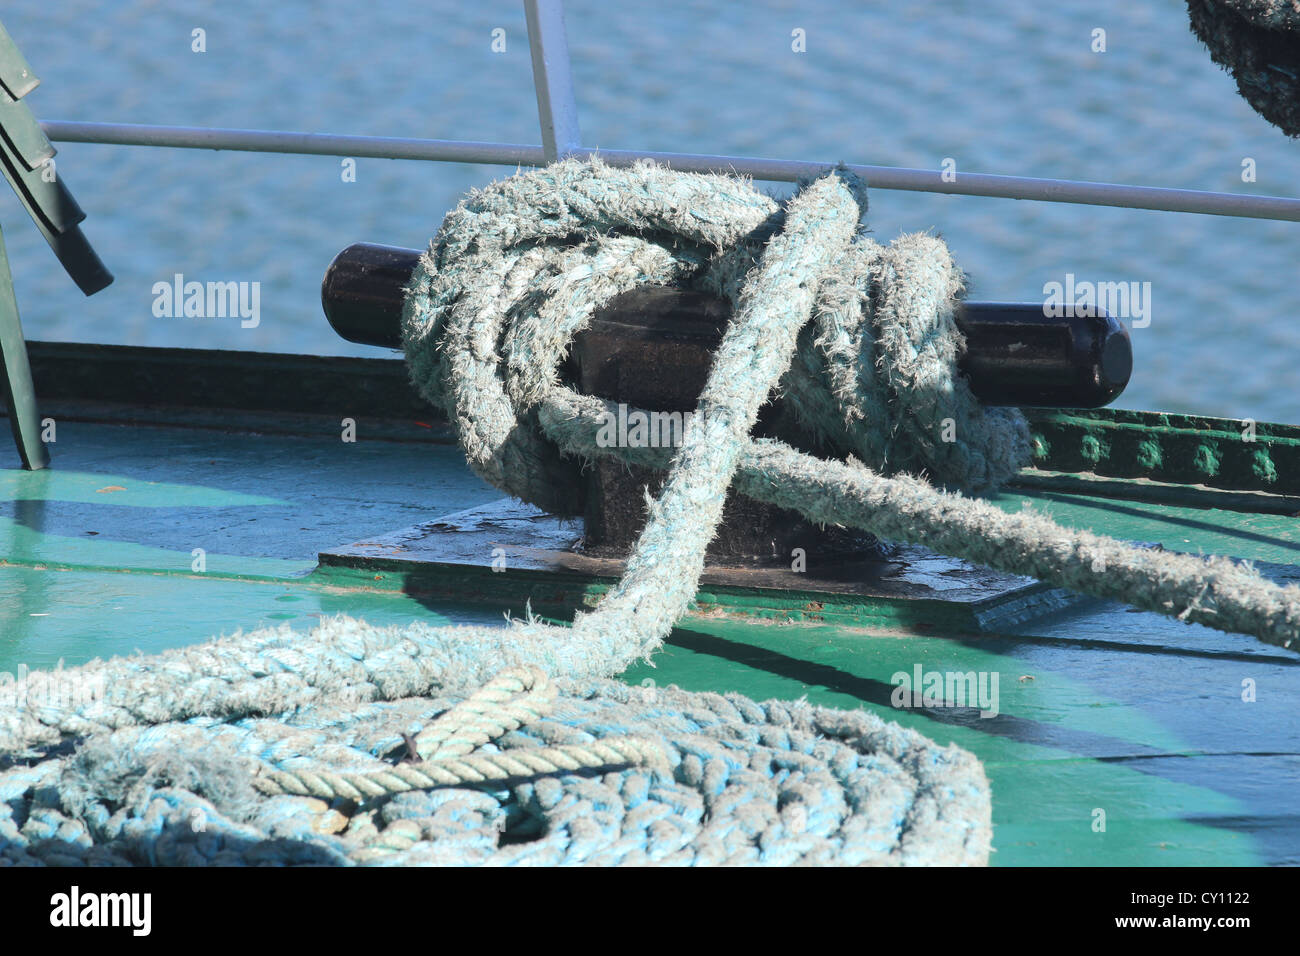 Round coiled light blue rope on boat deck Stock Photo